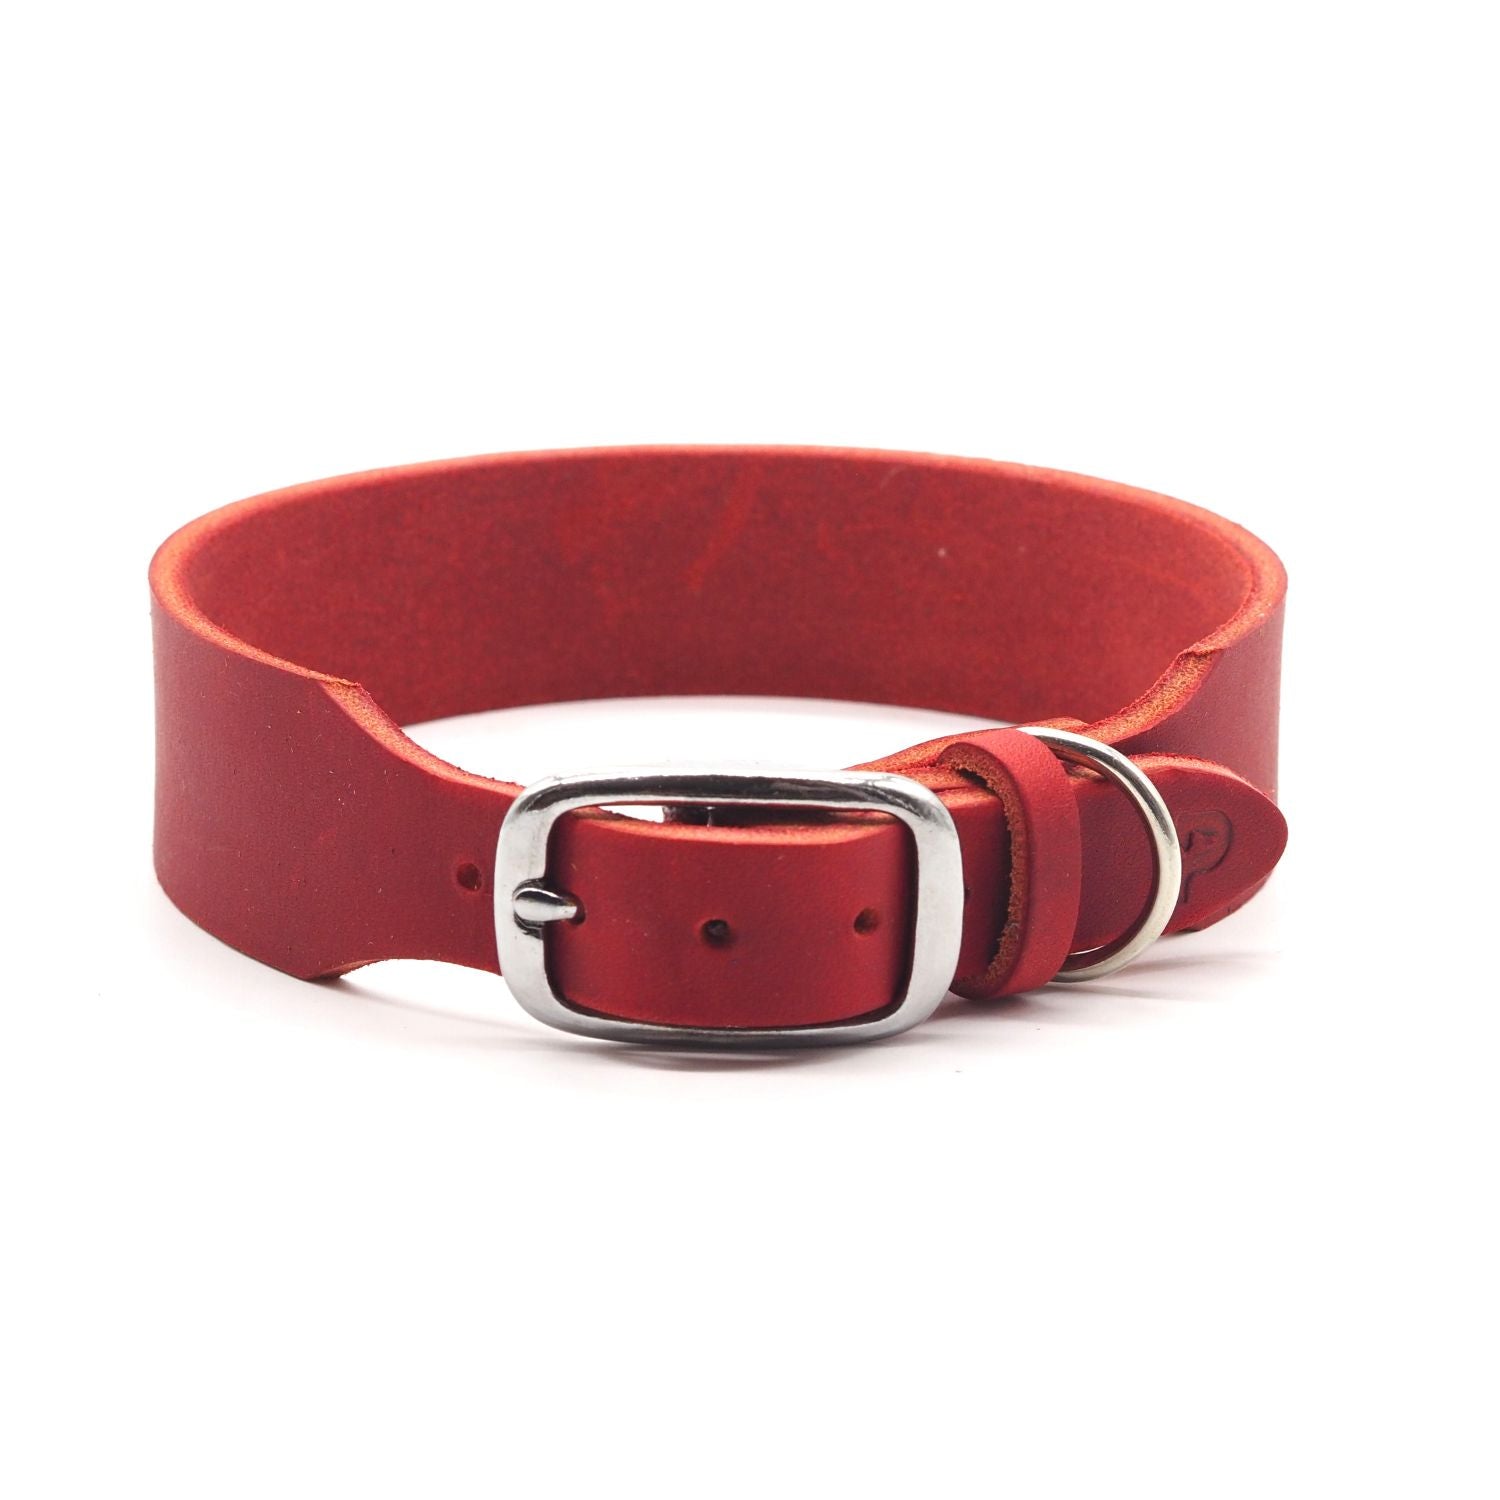 Personalizable collar with name | chili